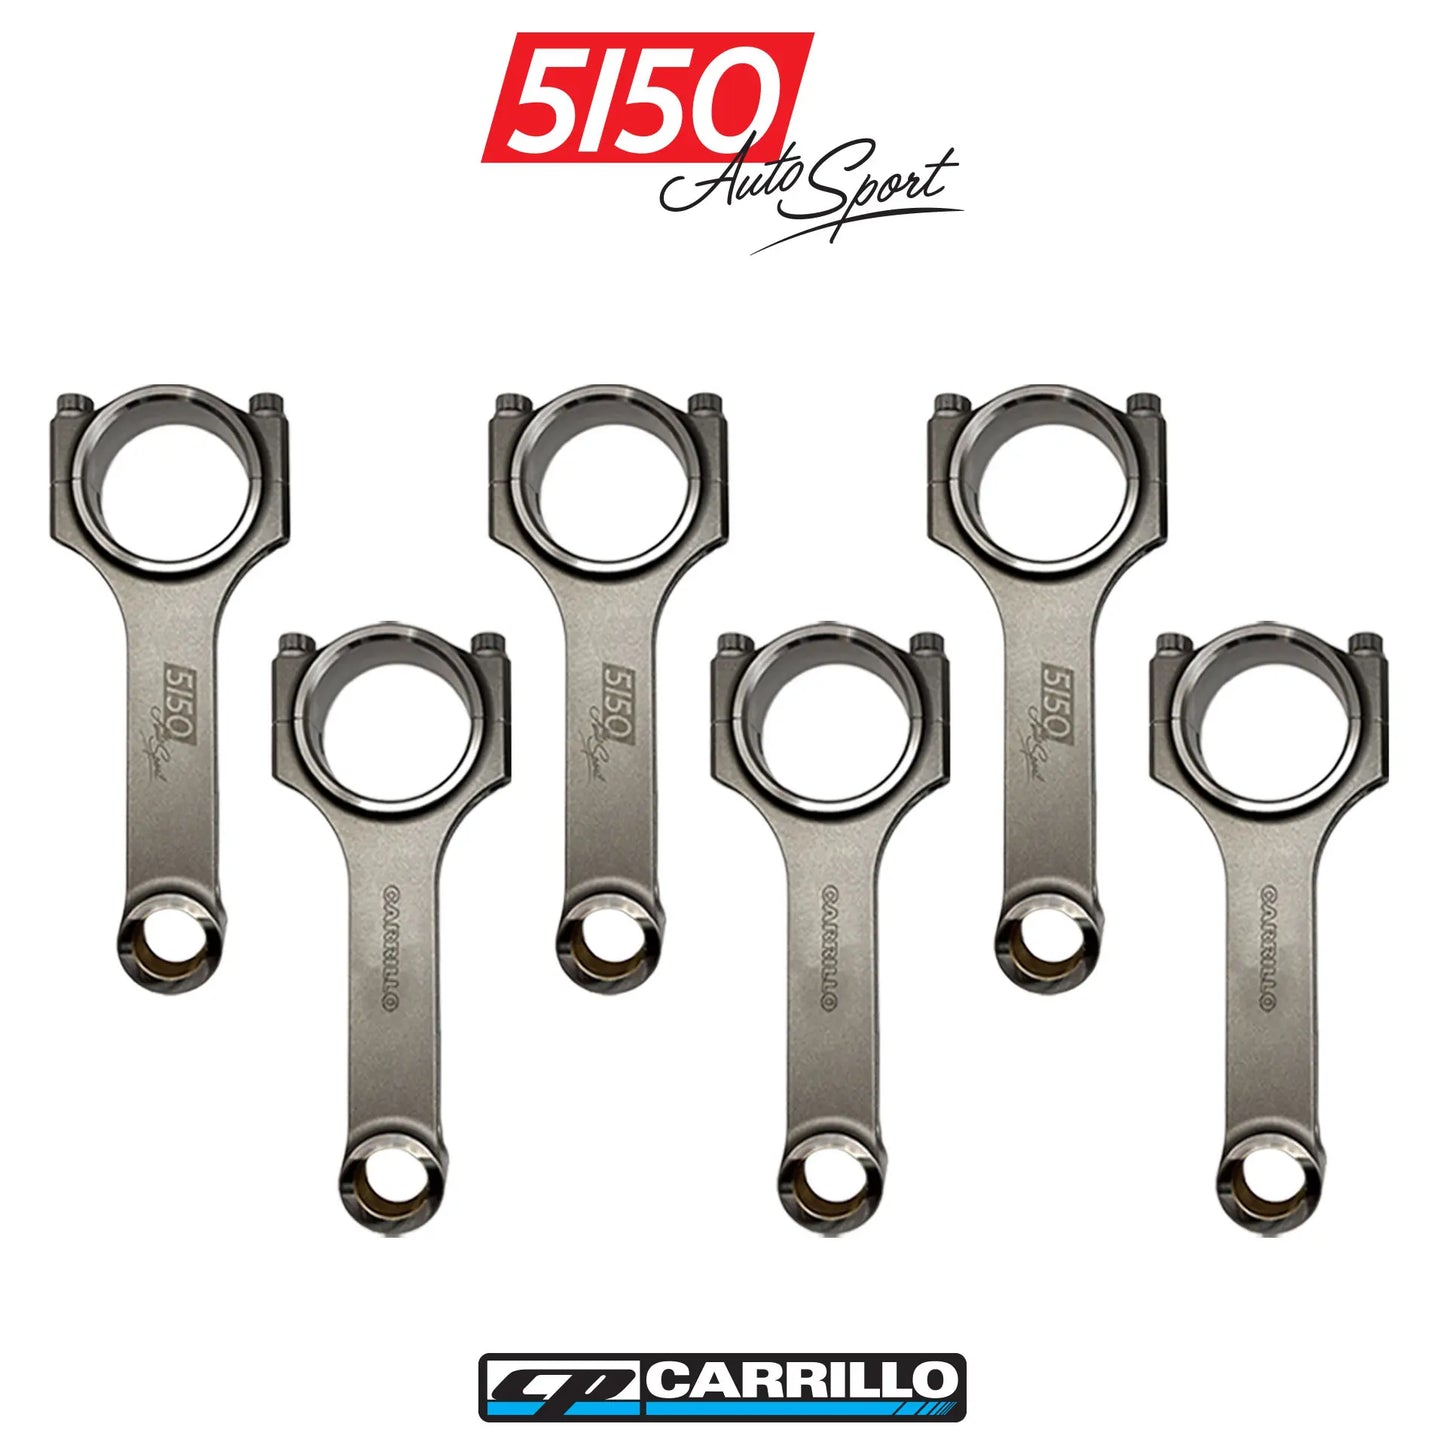 CP-Carrillo Forged 135mm Connecting Rod Set for BMW M50 M52 S50 S52 Pro-Xtreme